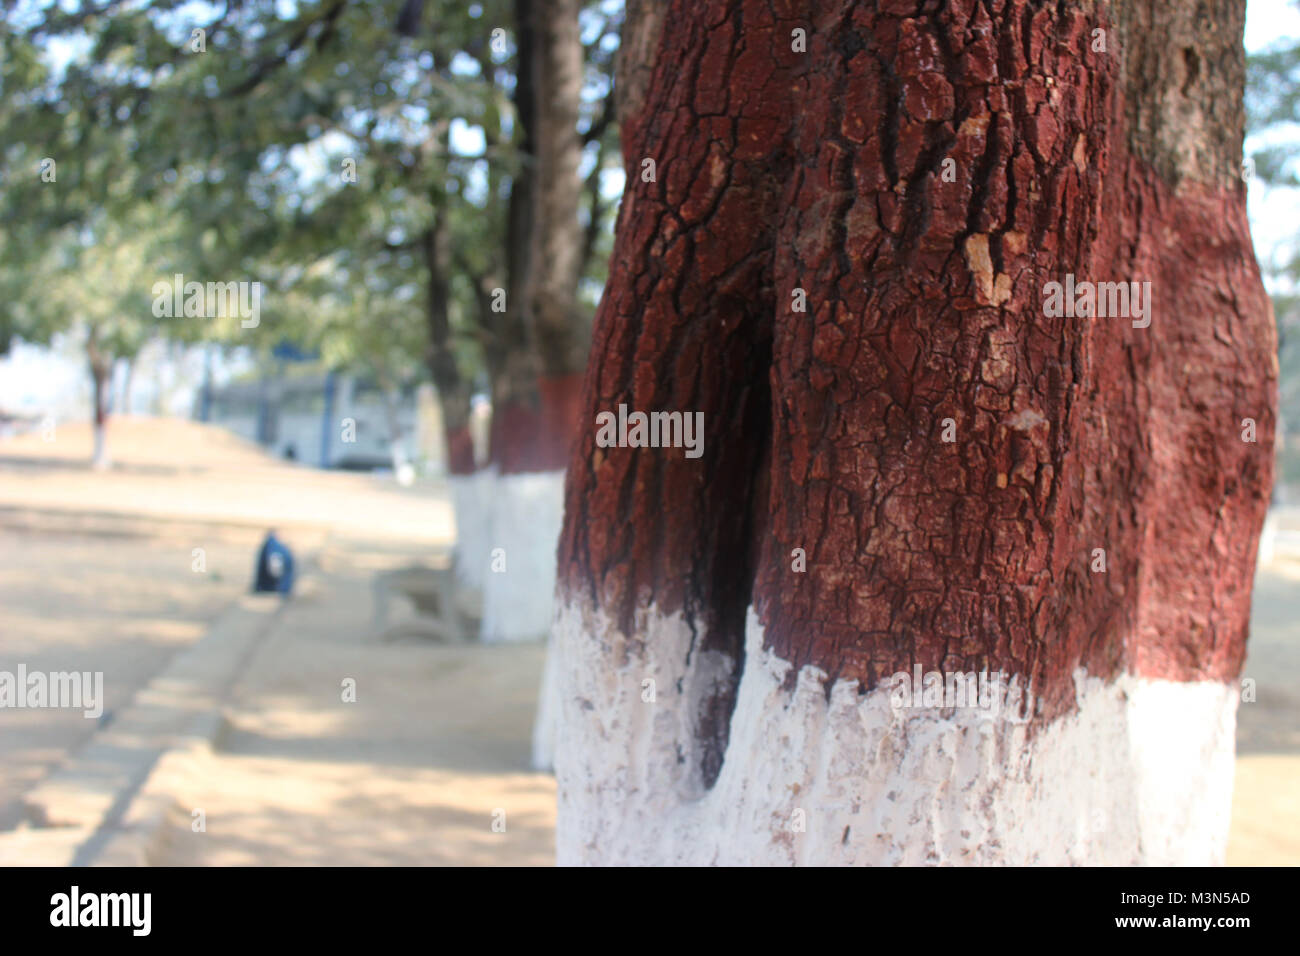 A squirrel's home inside a tree at a football field, at a school in Rawalpindi, Pakistan. Stock Photo